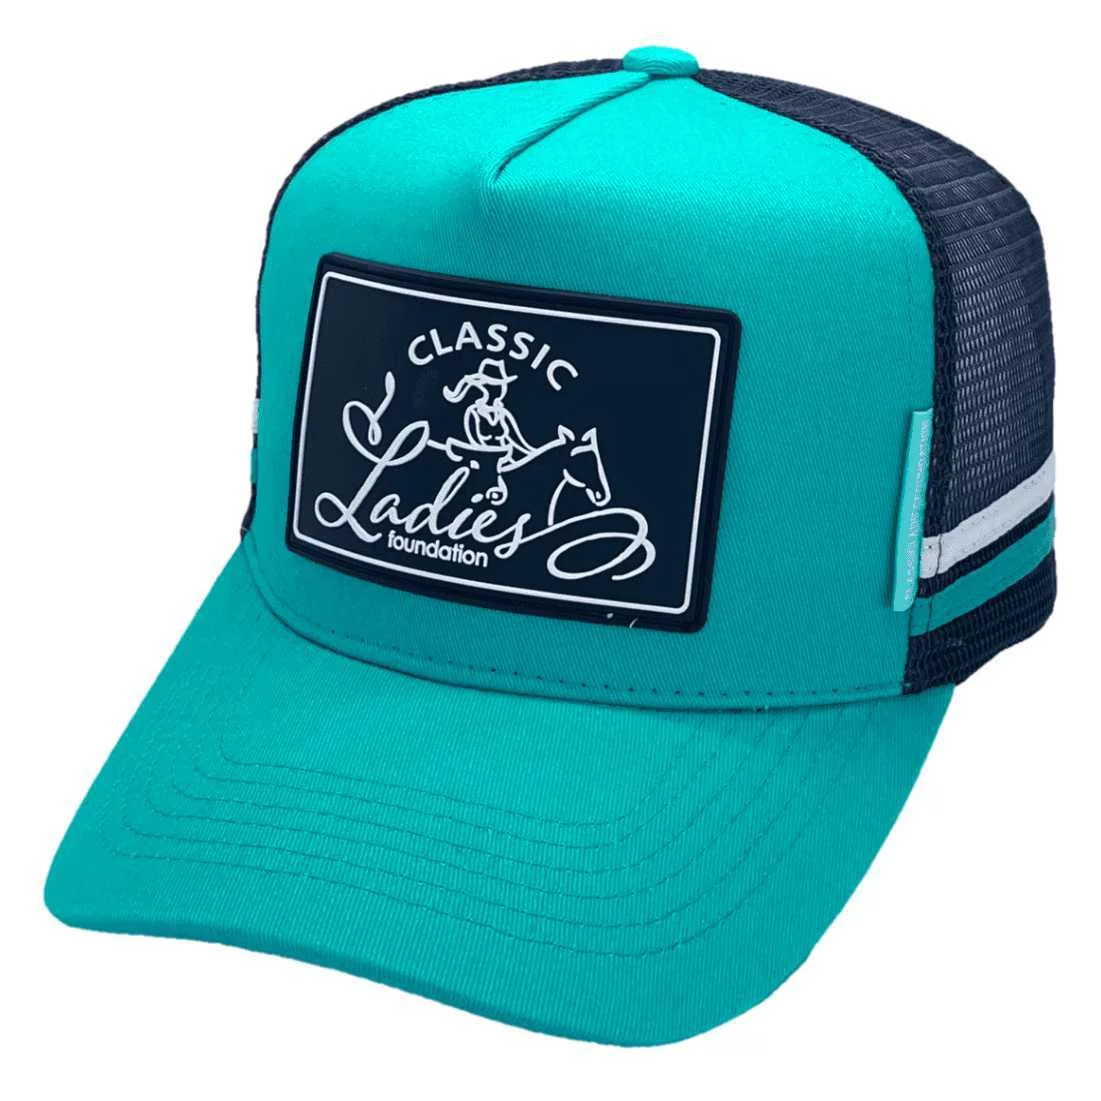 Classic Ladies Foundation Qld HP Original Midrange Aussie Trucker Hat with Australian Head Fit Crown and Rubber Badge Decoration Turquoise Navy White